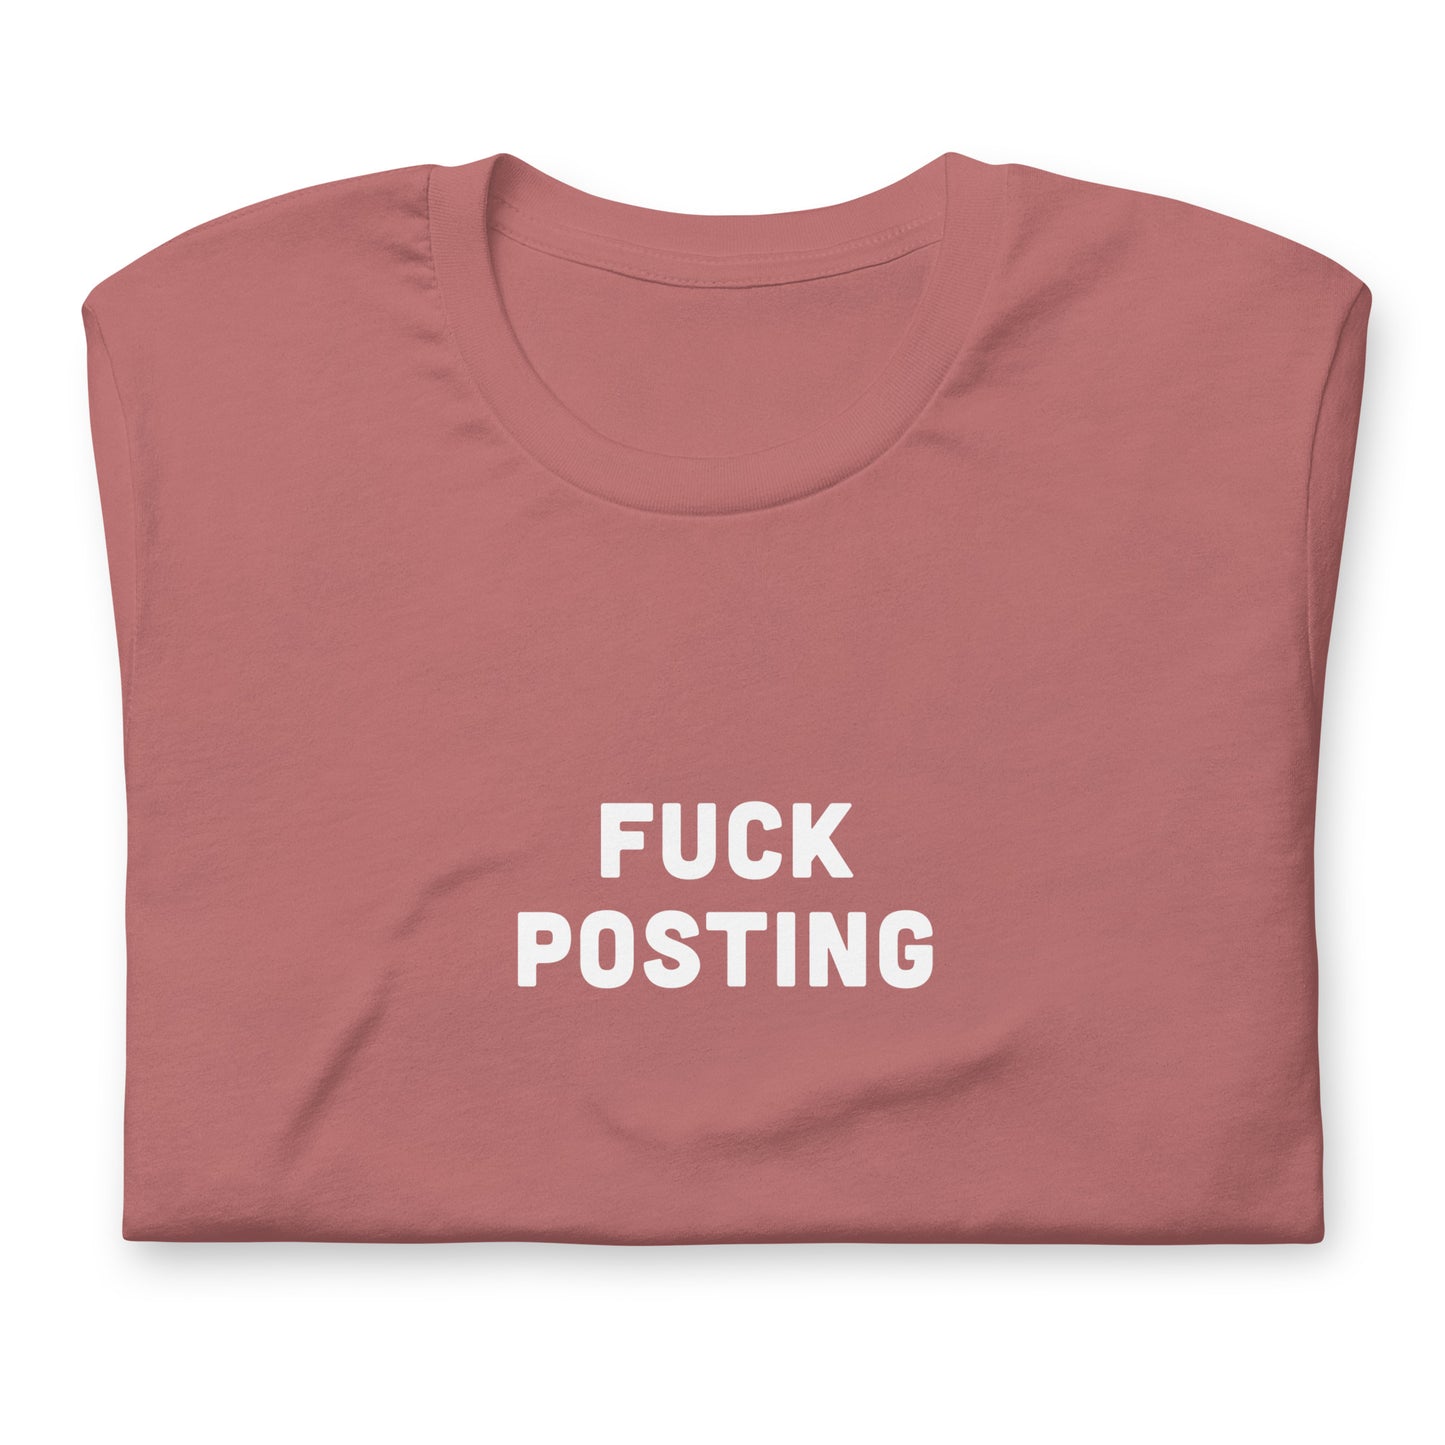 Fuck Posting T-Shirt Size 2XL Color Navy